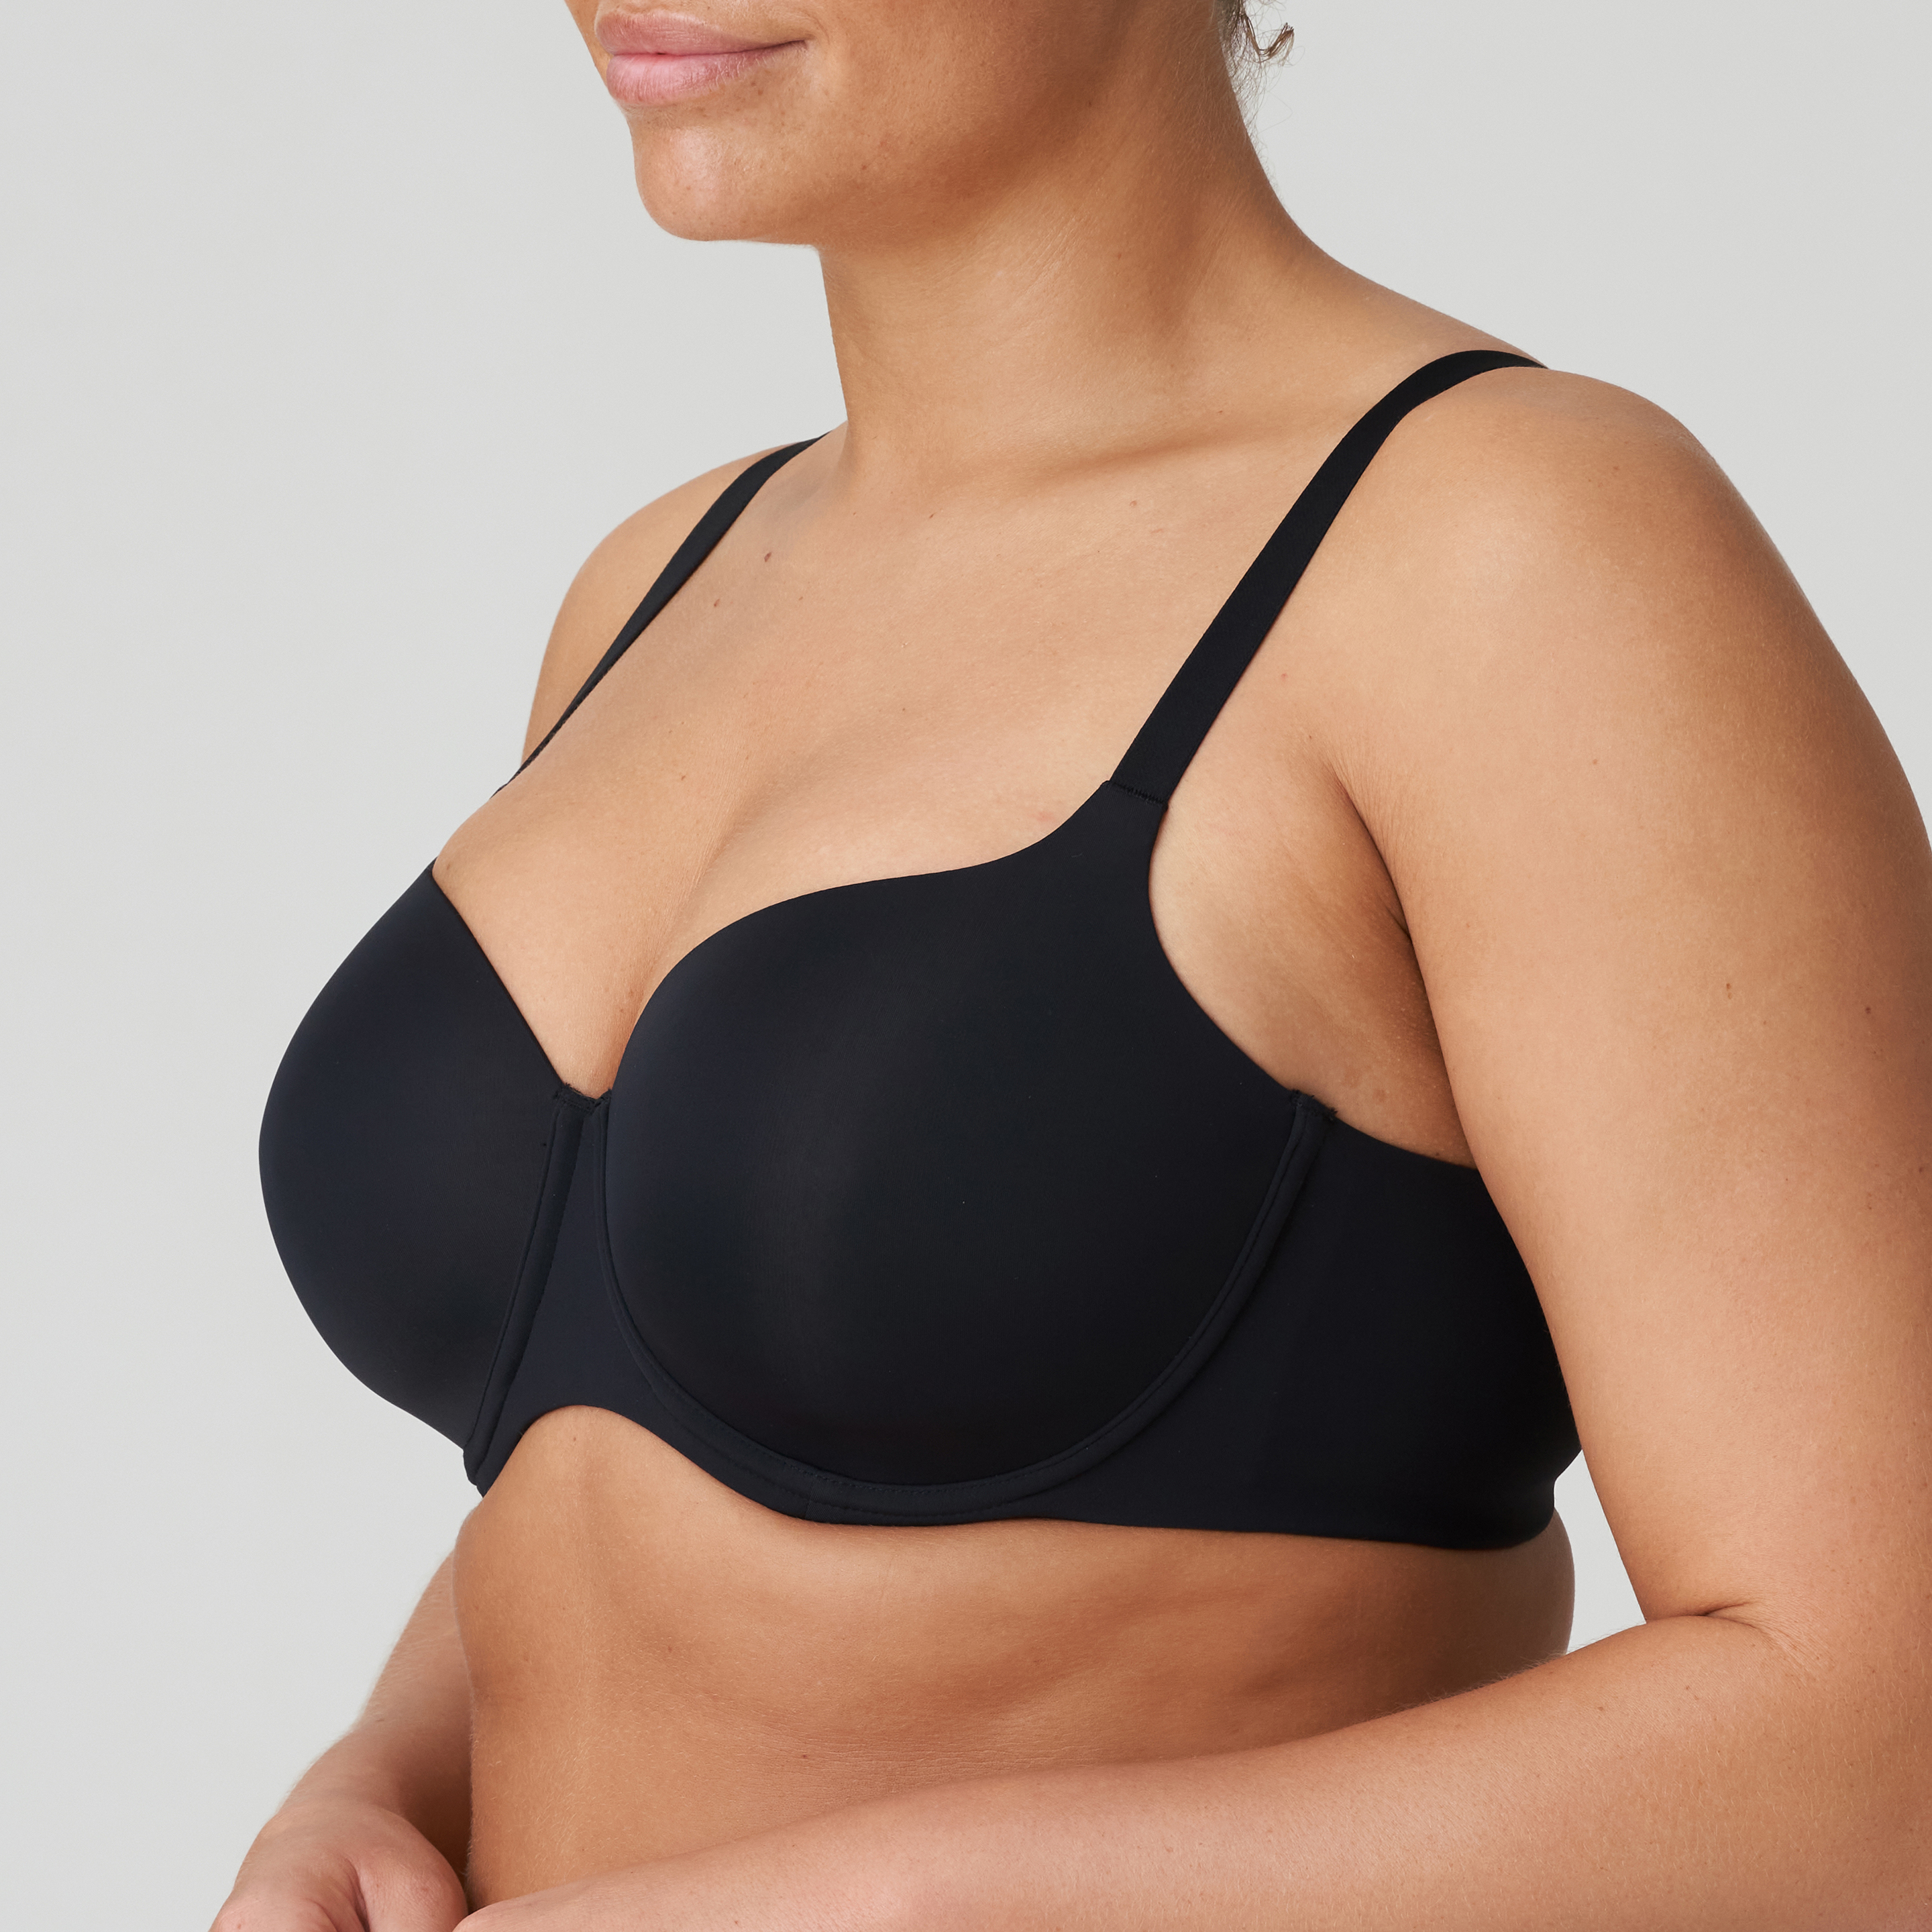 PrimaDonna Figuras 0163256 Women's Charcoal Non-Padded Wired Spacer Bra 34D